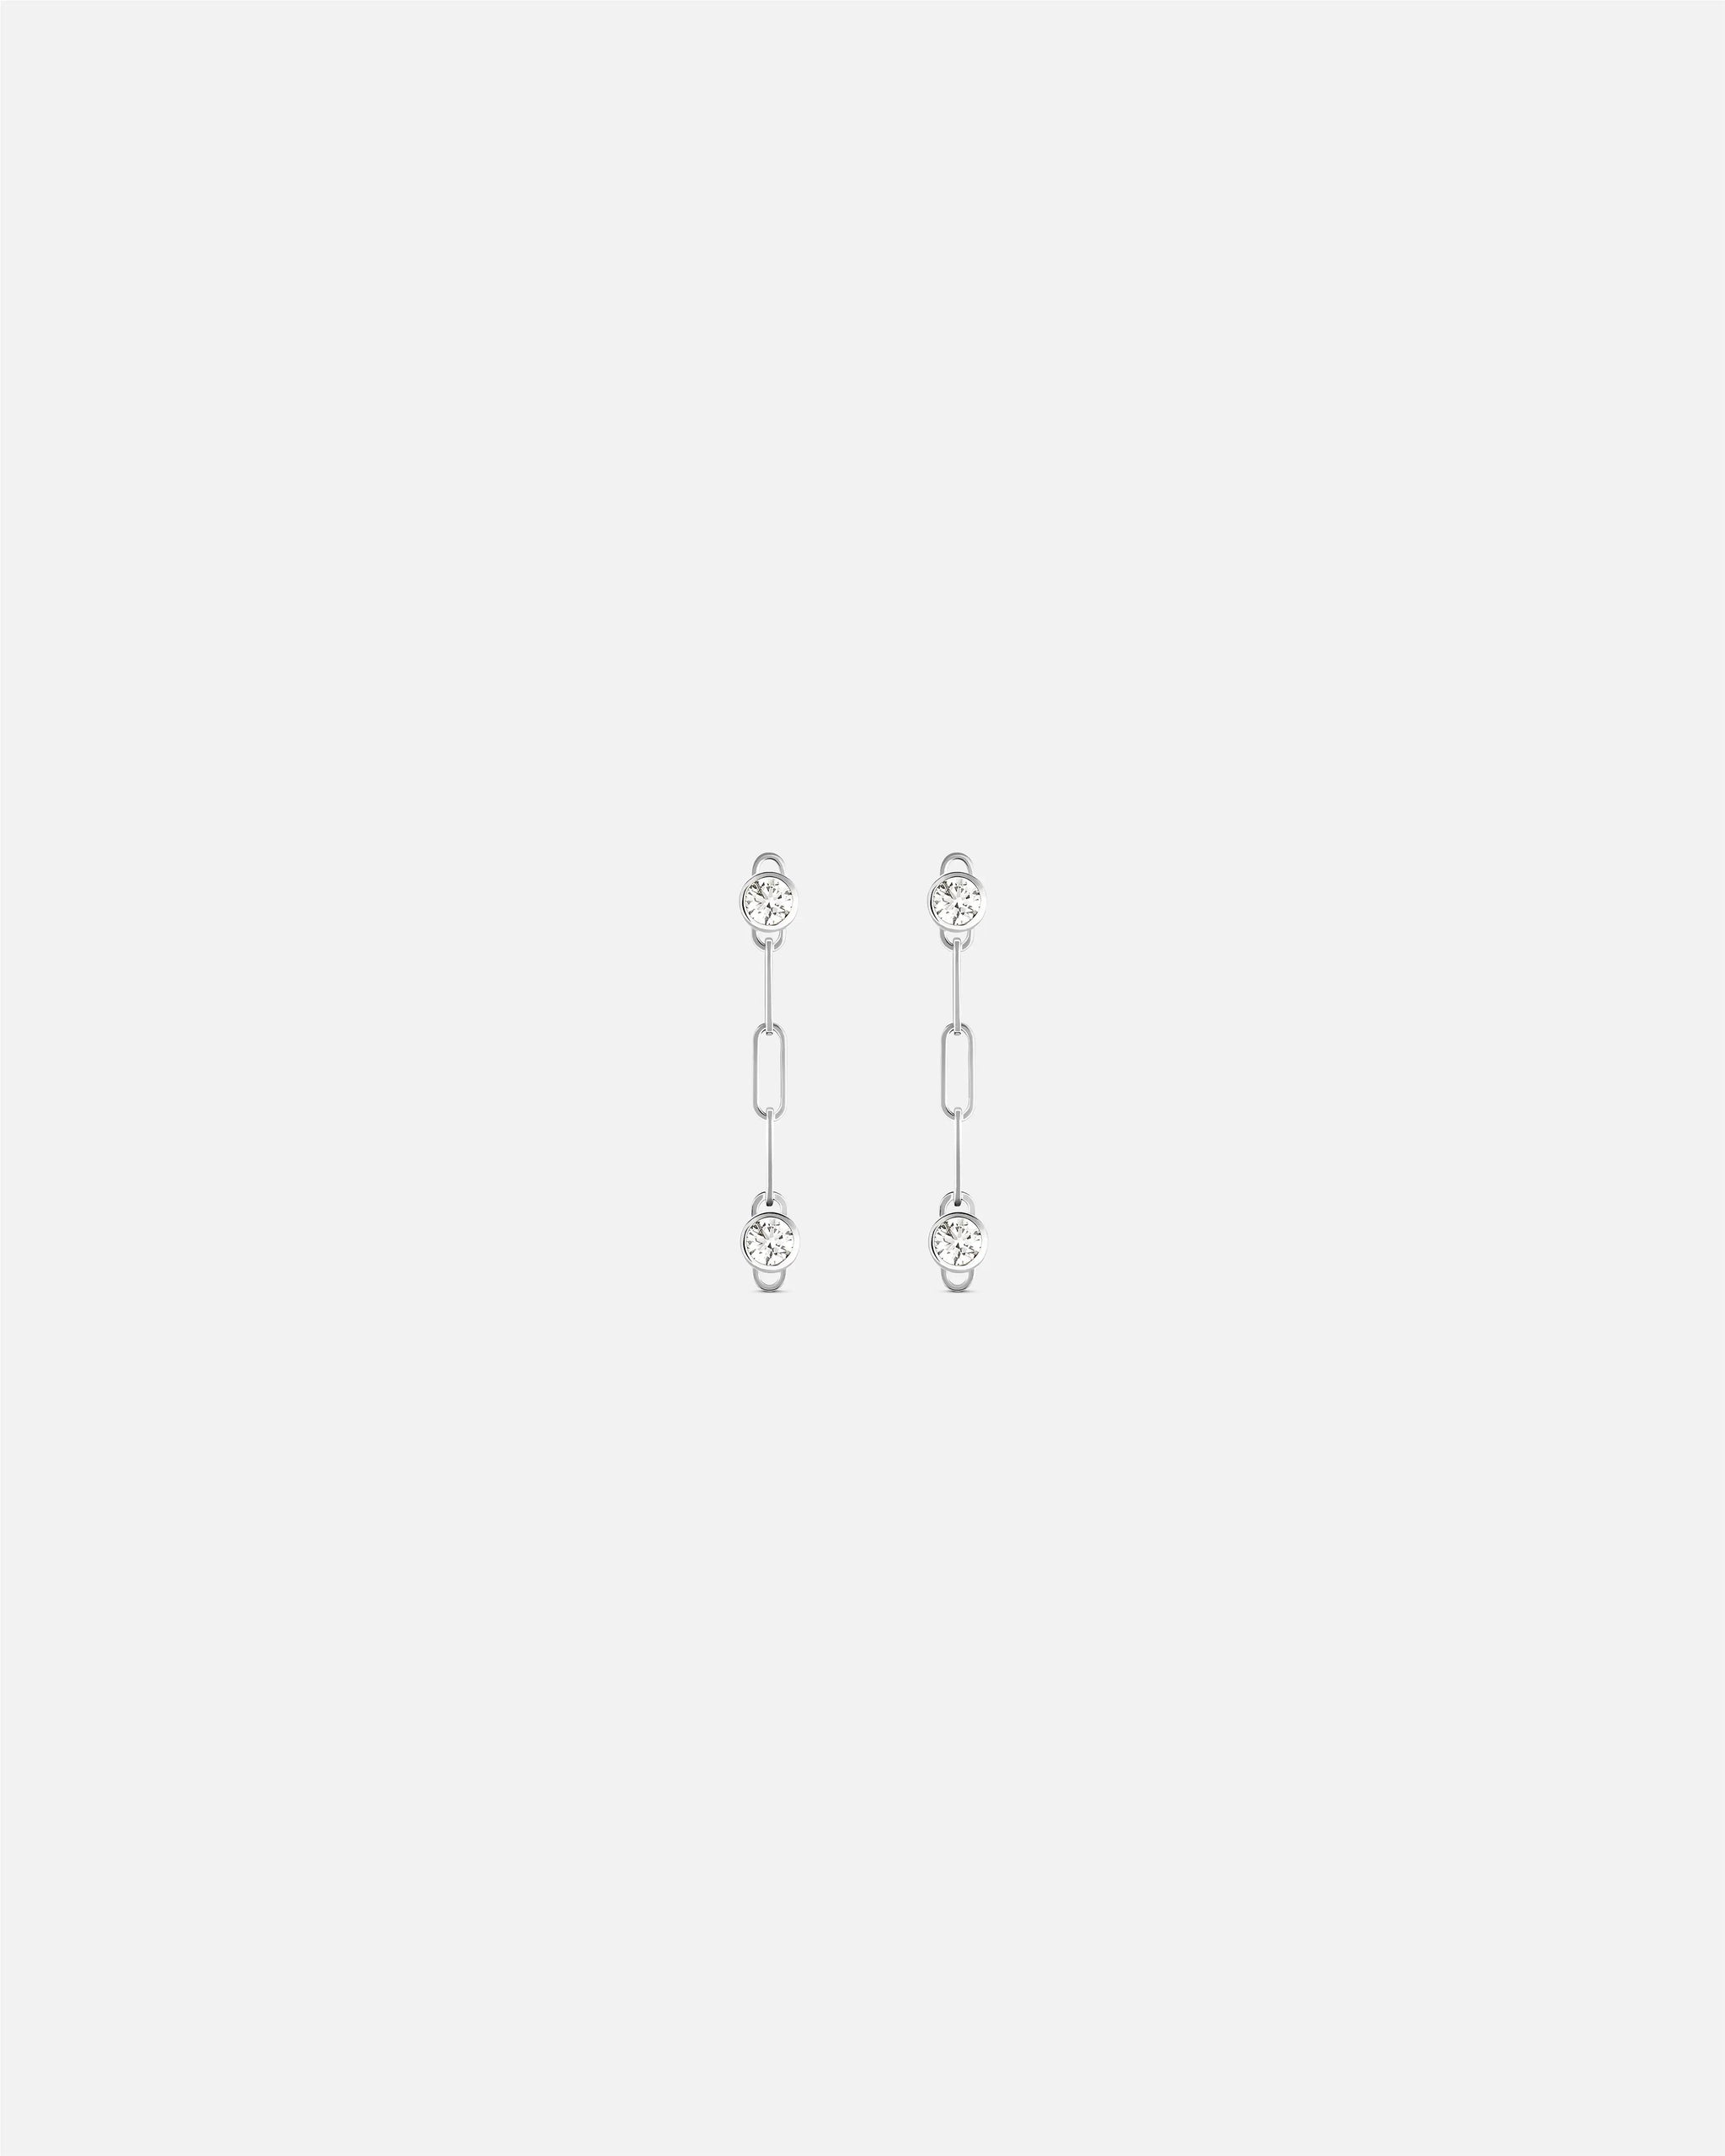 Round Duo PM Classics Earrings in White Gold - 1 - Nouvel Heritage